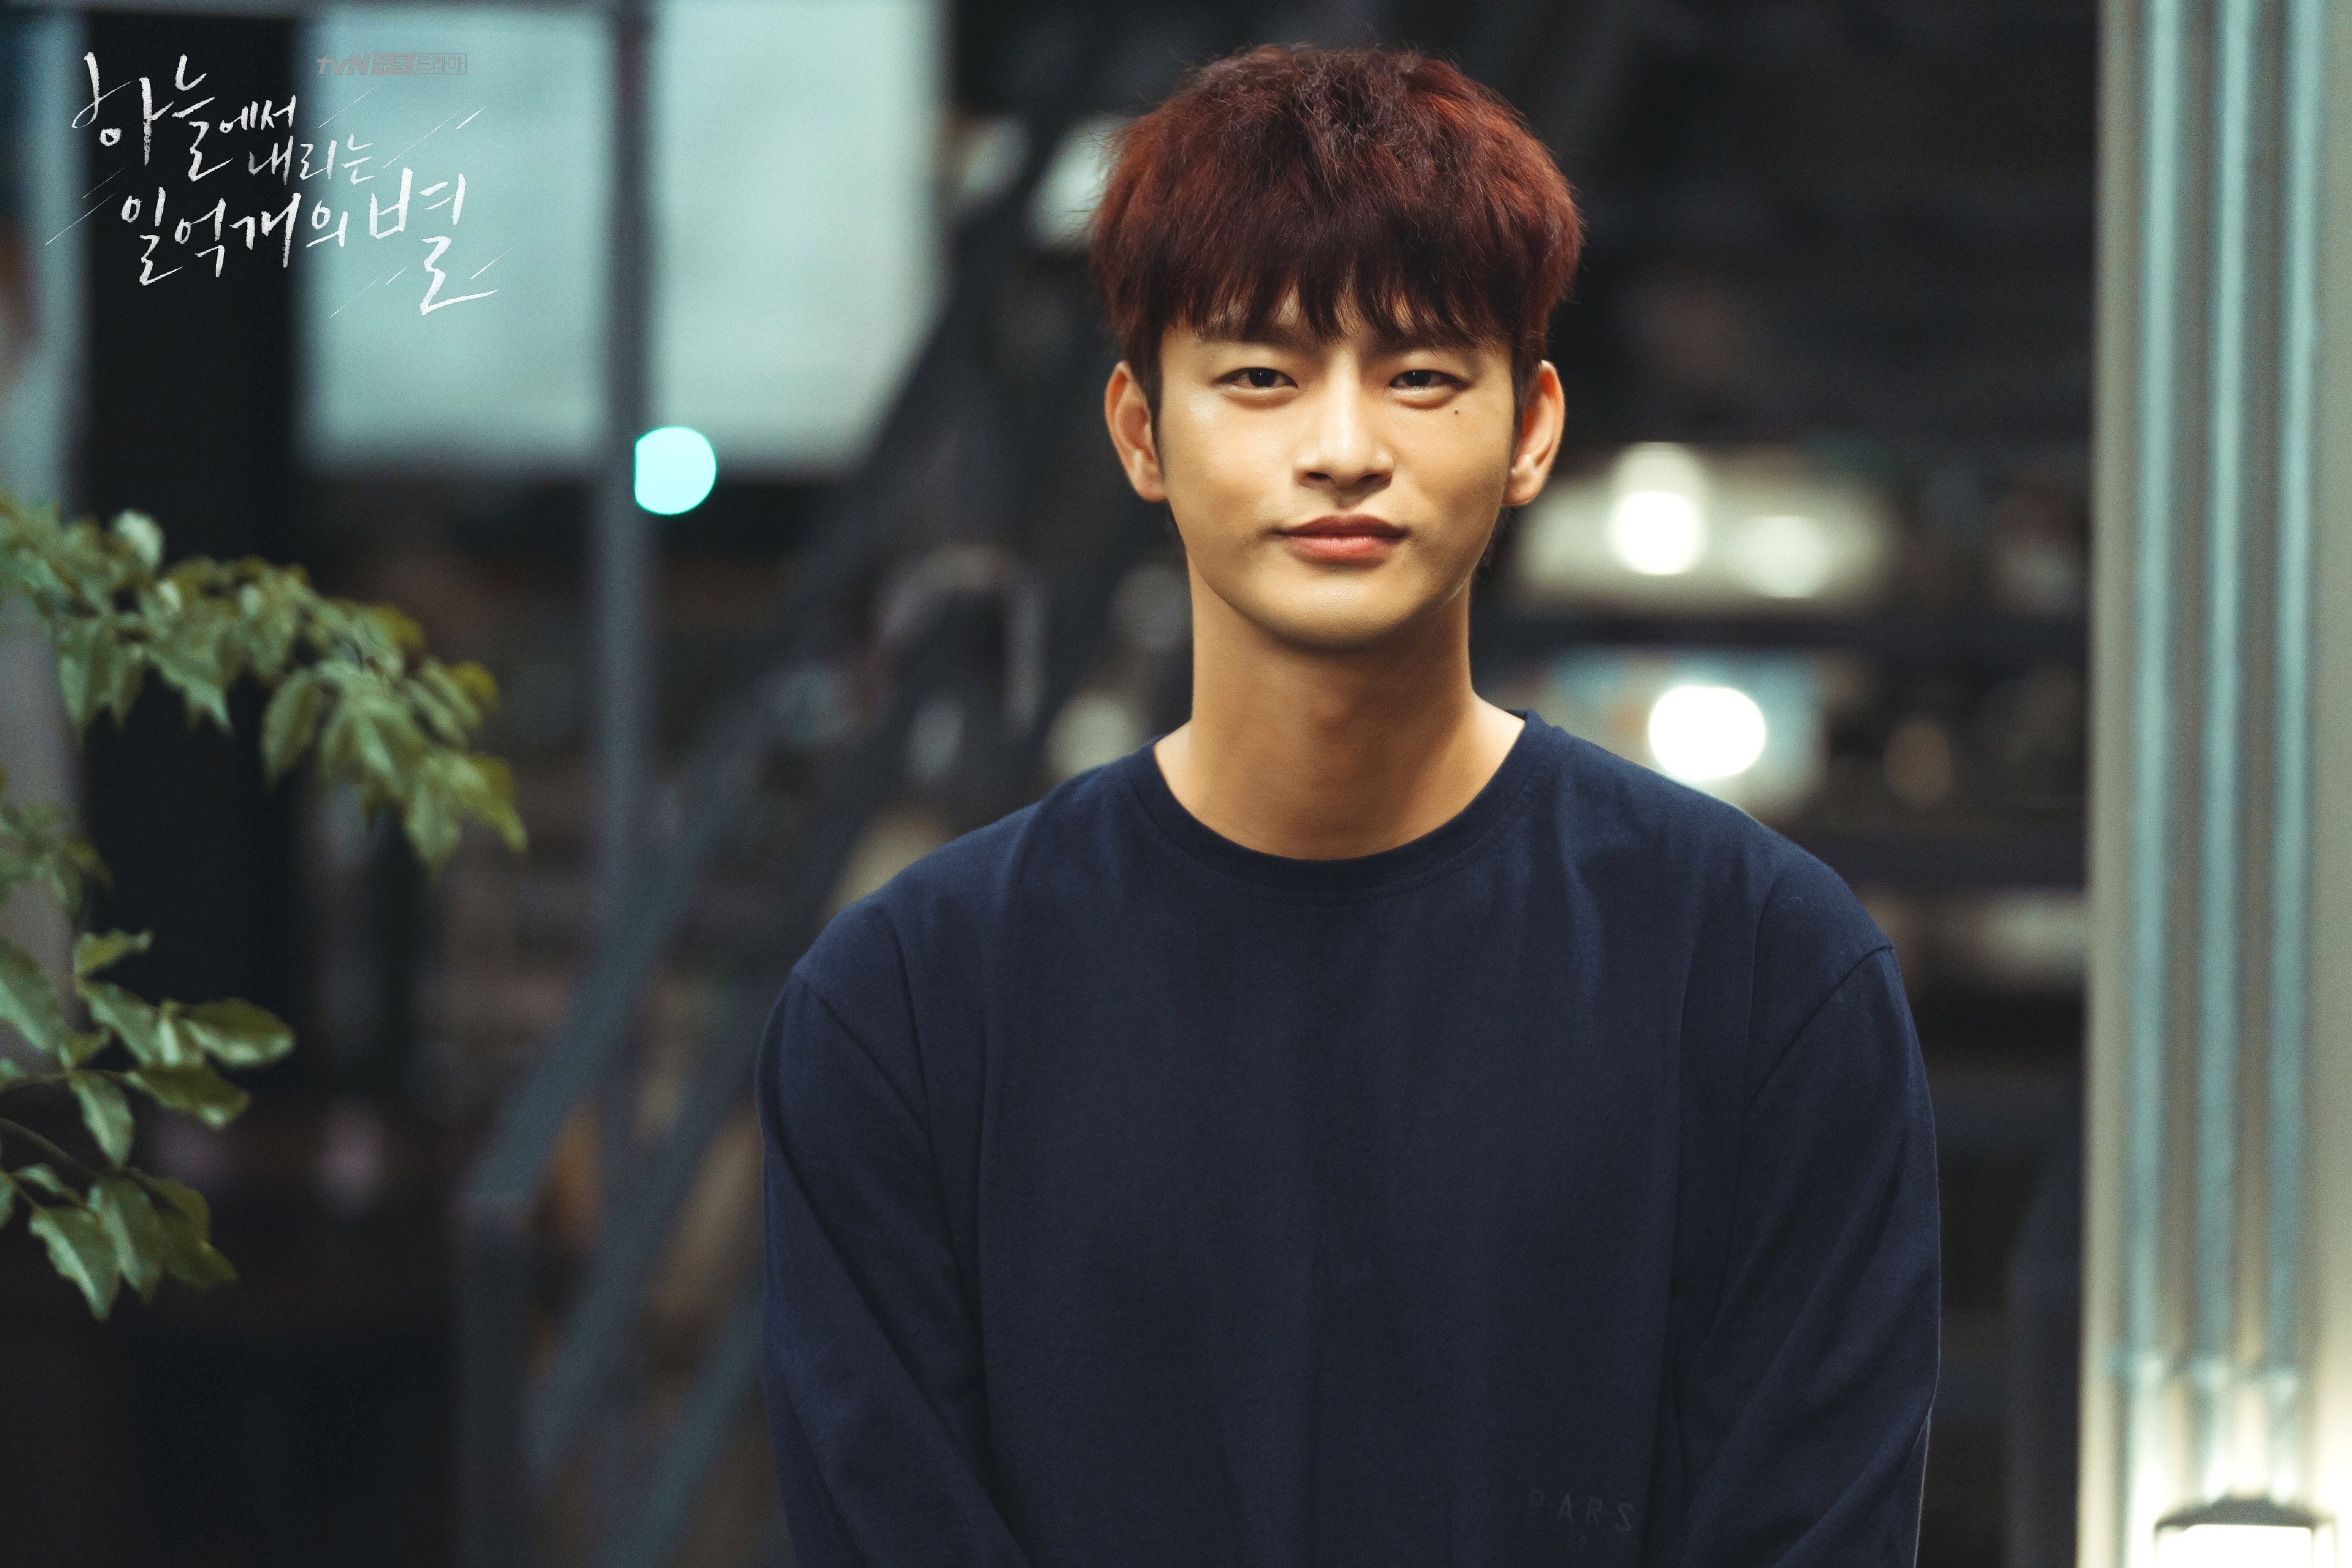 seo-in-guk-to-make-cameo-appearance-on-tvn-drama-navillera